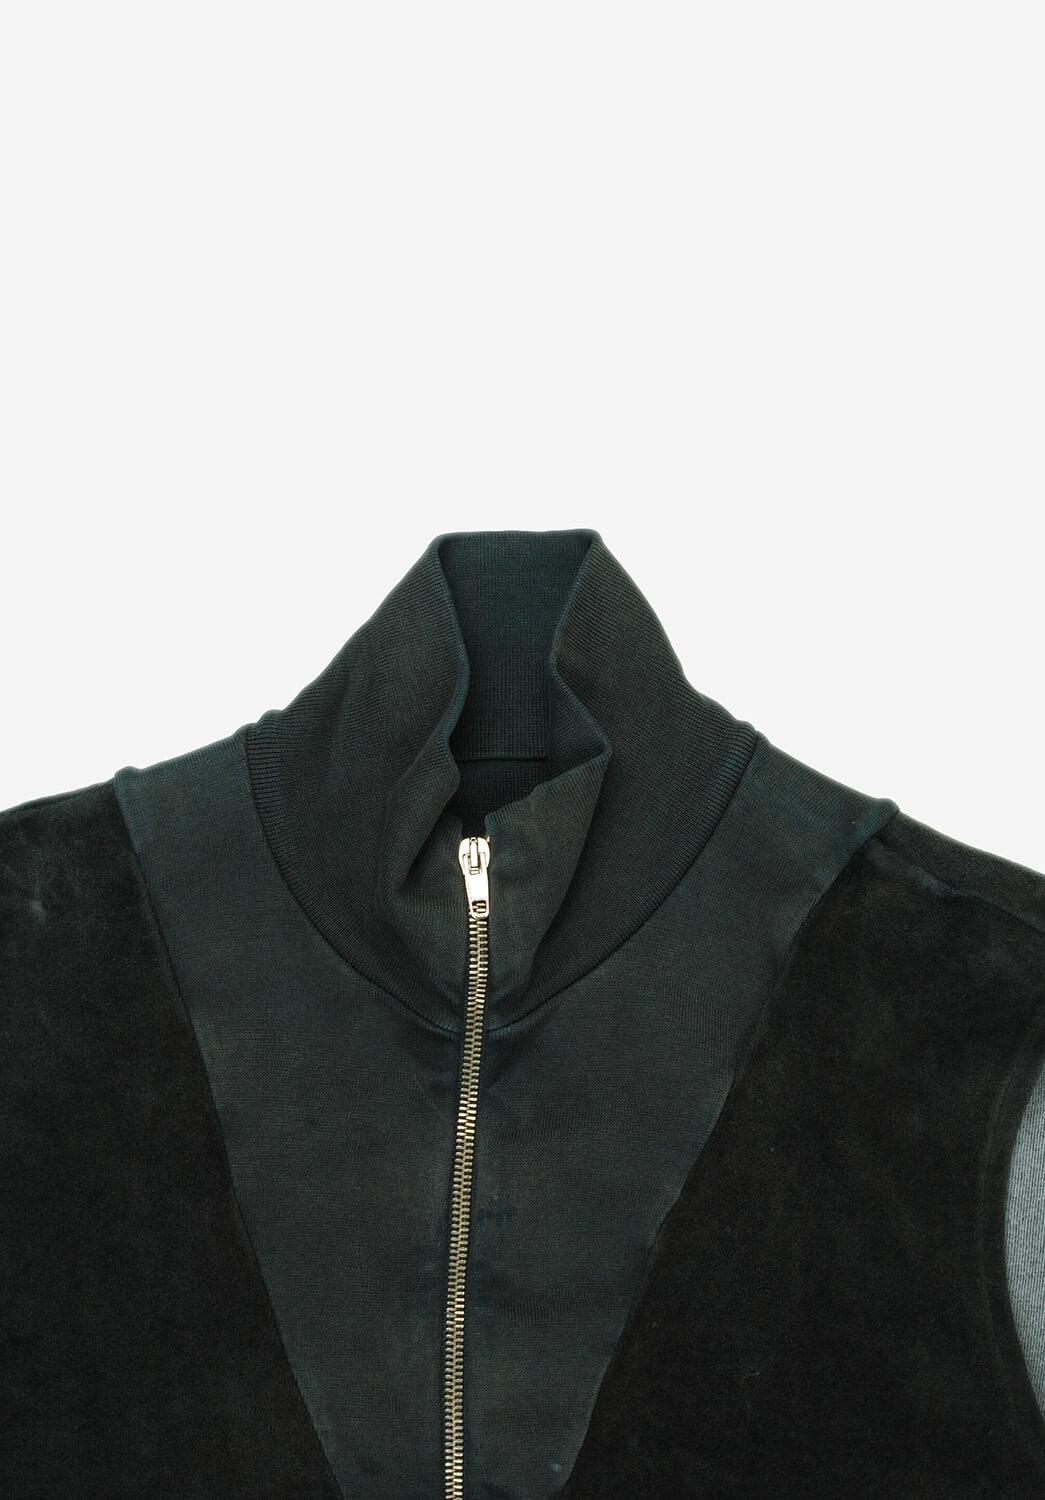 Item for sale is 100% genuine Martin Margiela Velour Top
Color: khaki
(An actual color may a bit vary due to individual computer screen interpretation)
Material: 92% cotton, 7% polyester, 1% elastan
Tag size: Medium
This vest is great quality item.